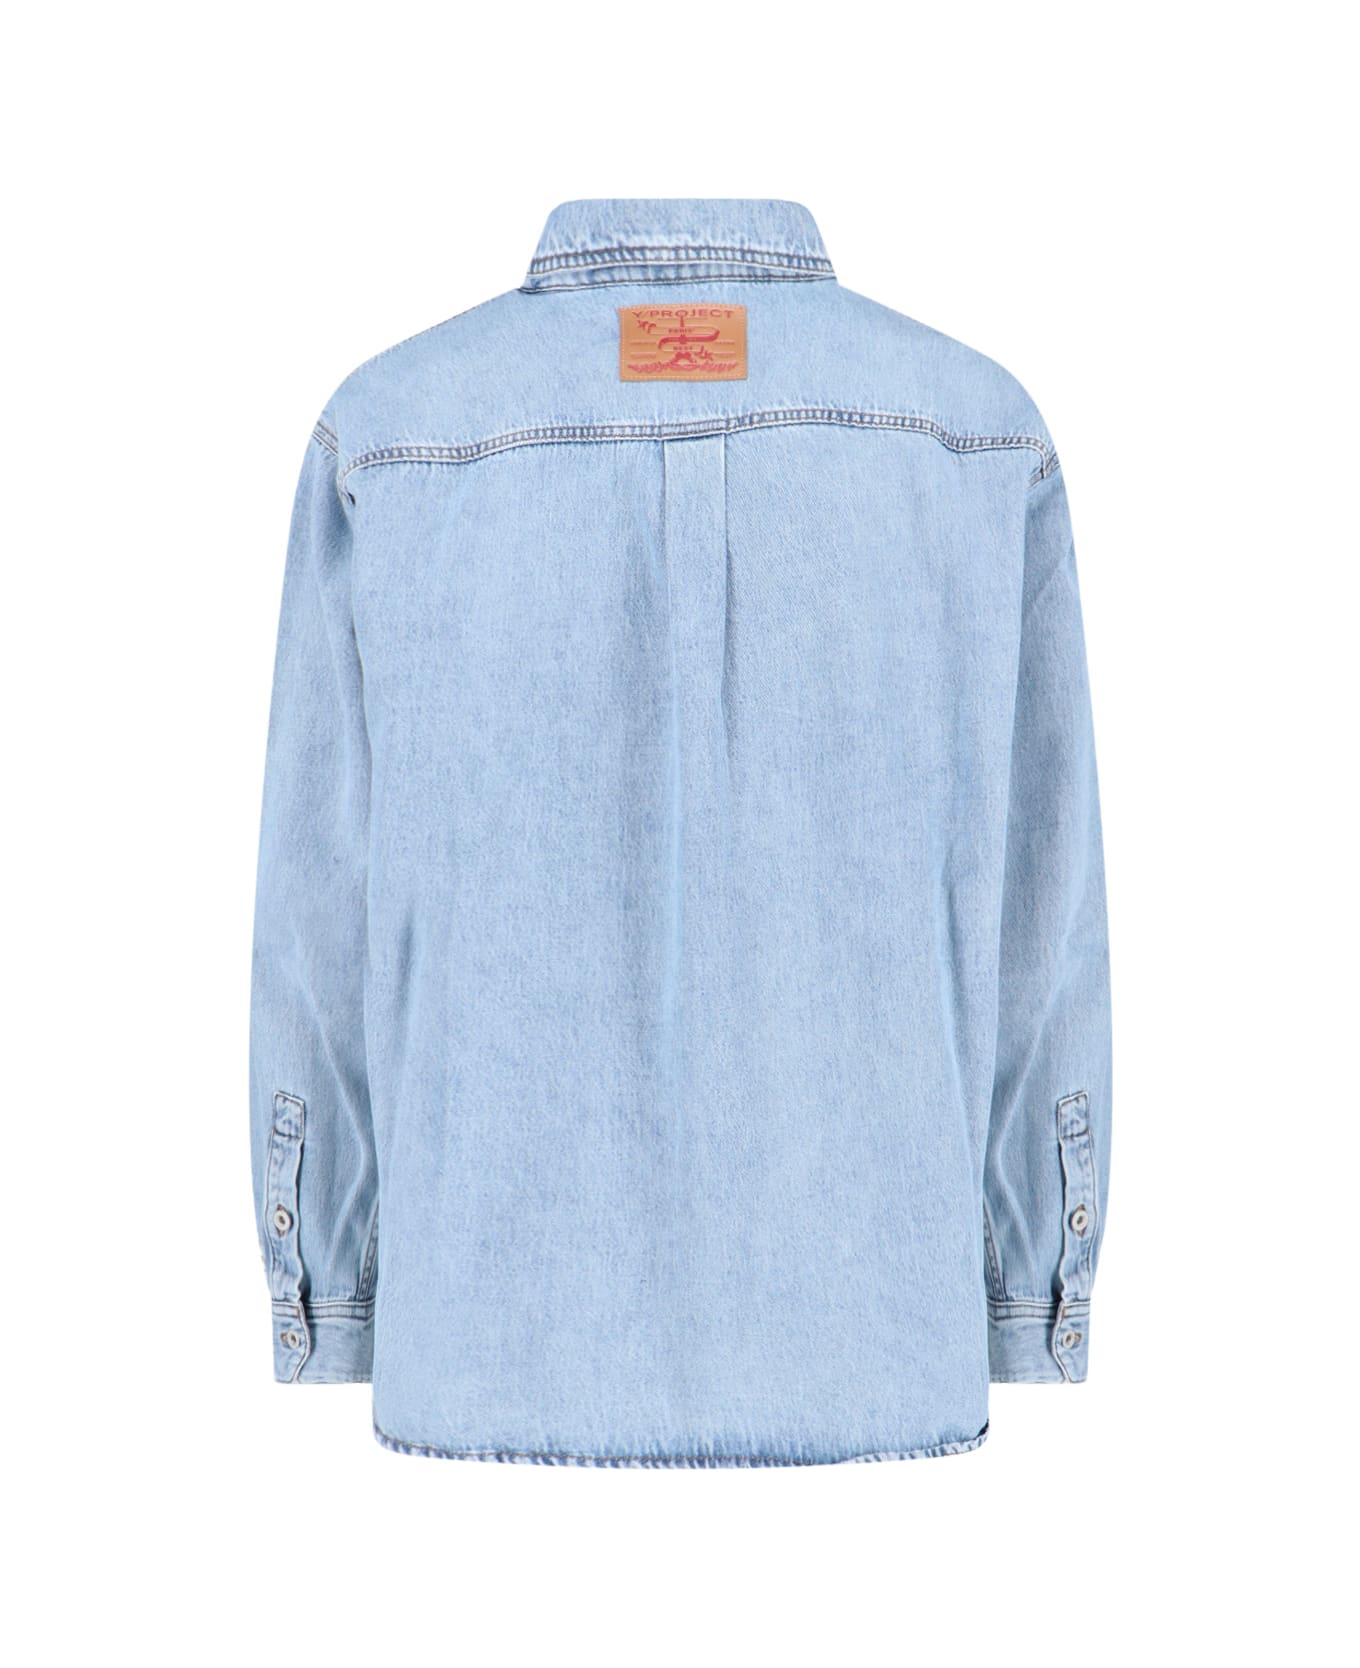 Y/Project 'hook And Eye' Shirt Jacket - Light Blue シャツ